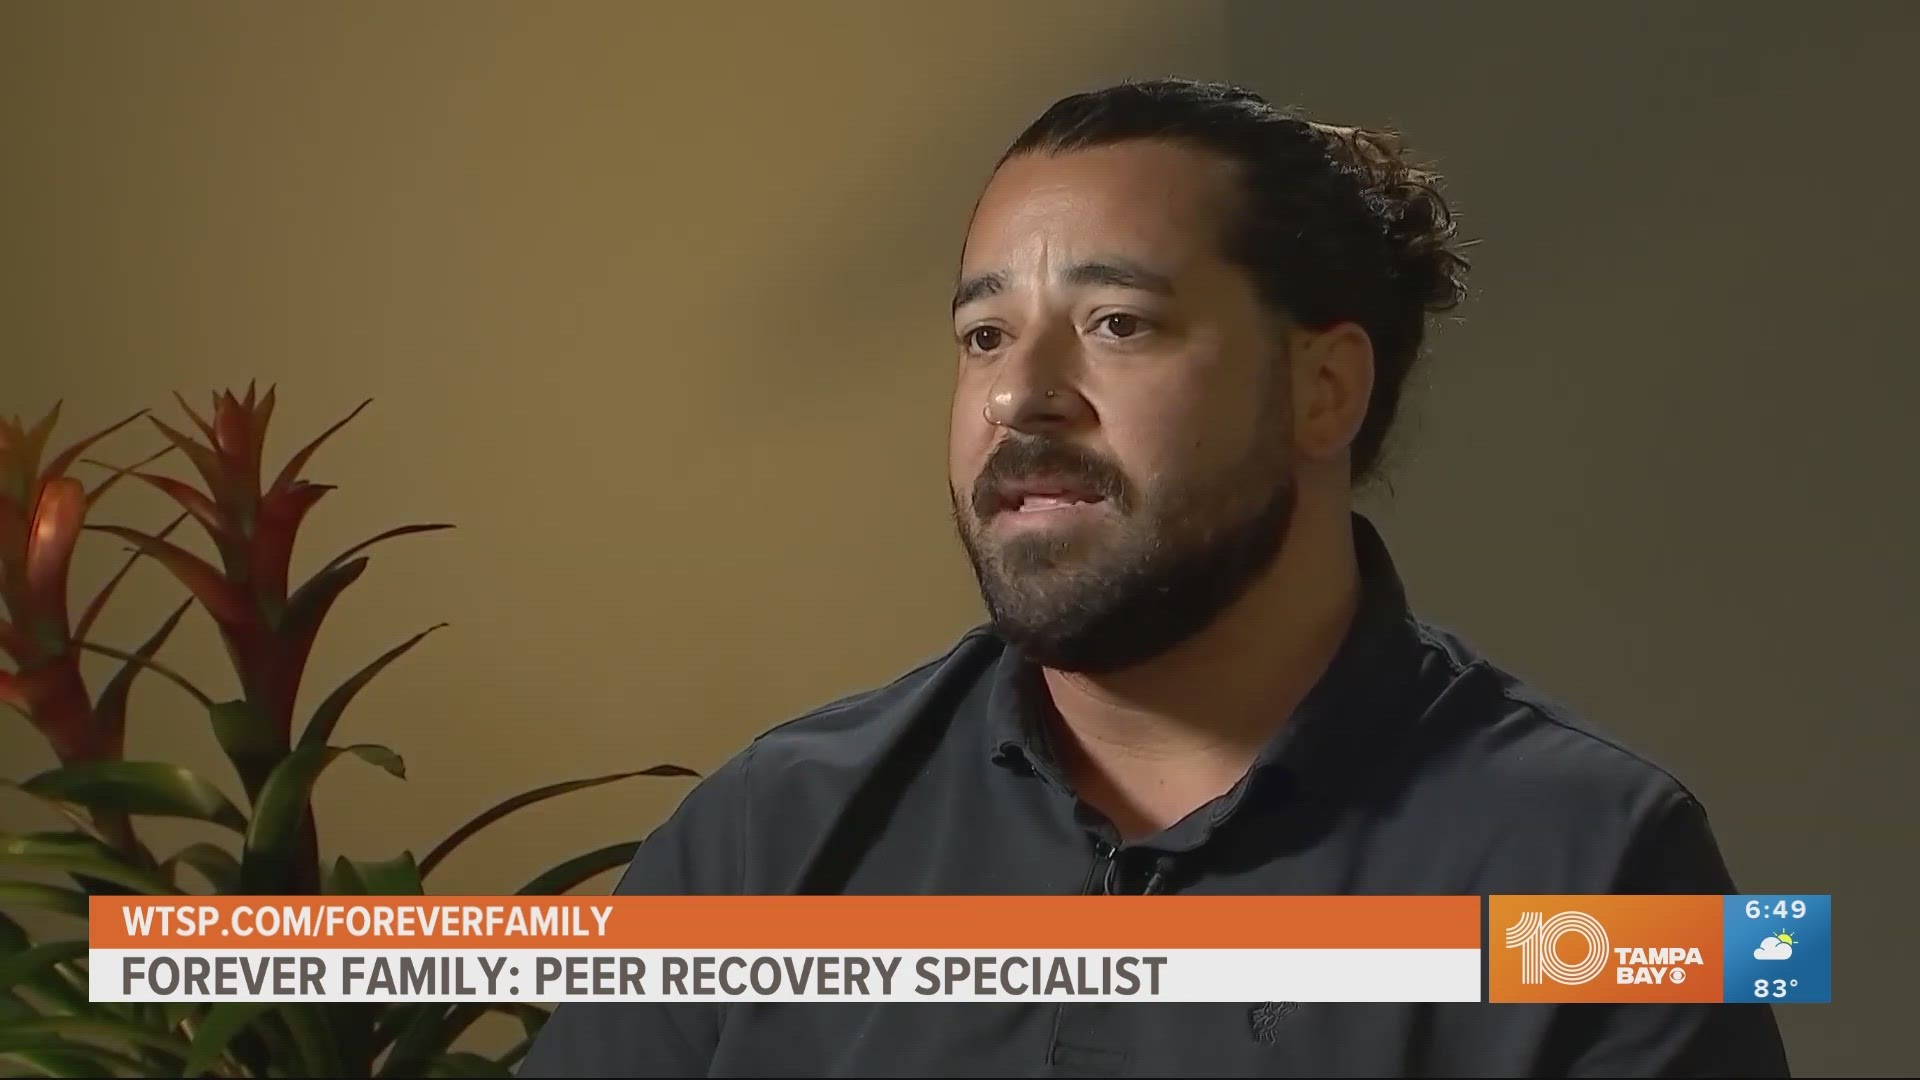 Peer specialists have struggled with addiction themselves. Now, they're using their experience to help parents in need.